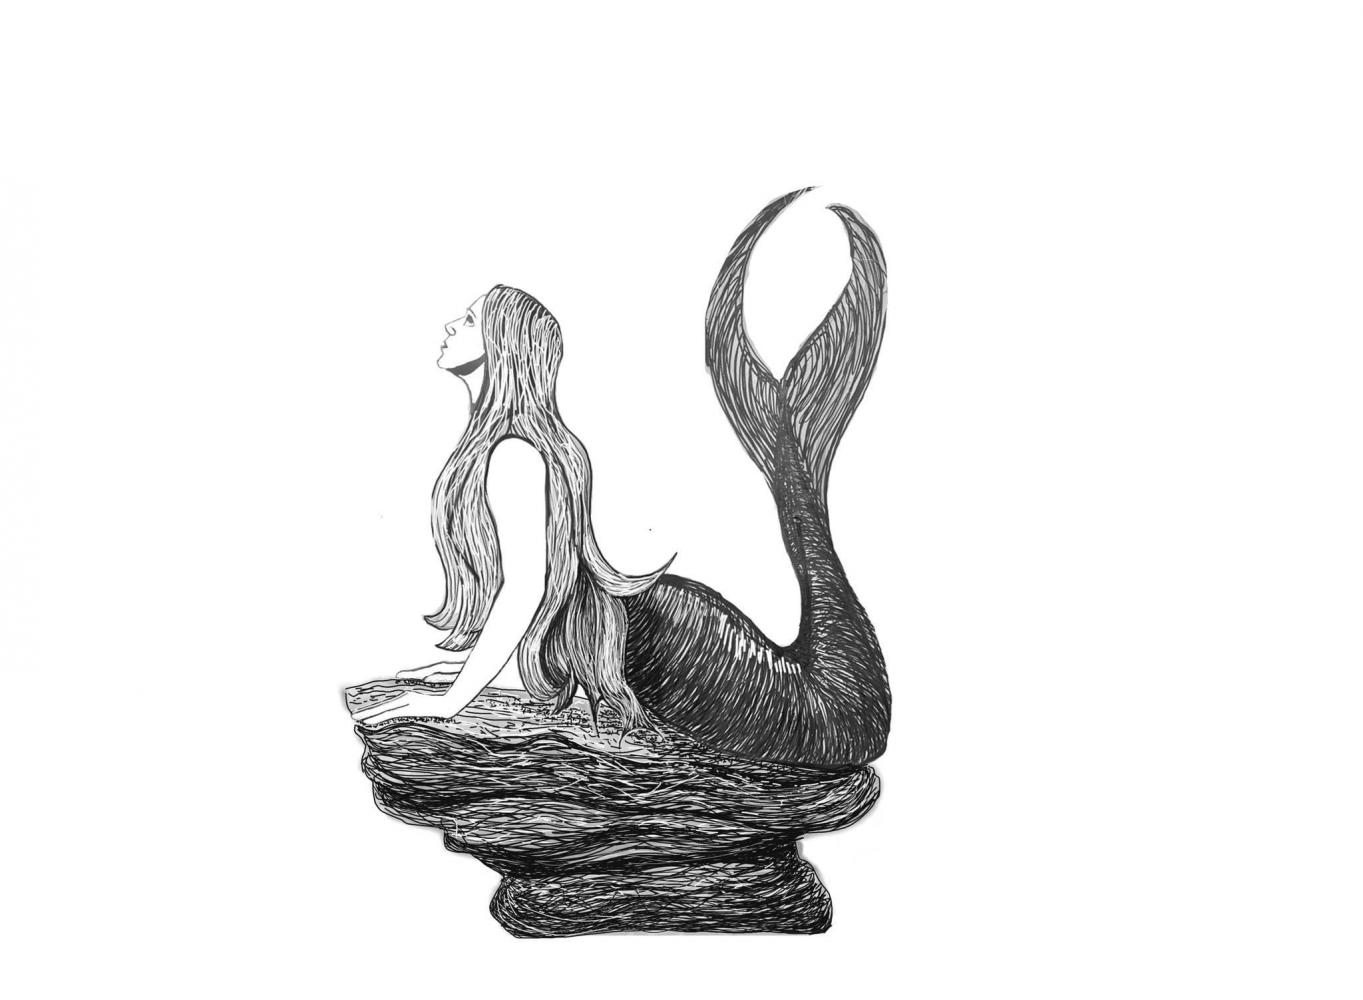 Initial drawing of the willow mermaid